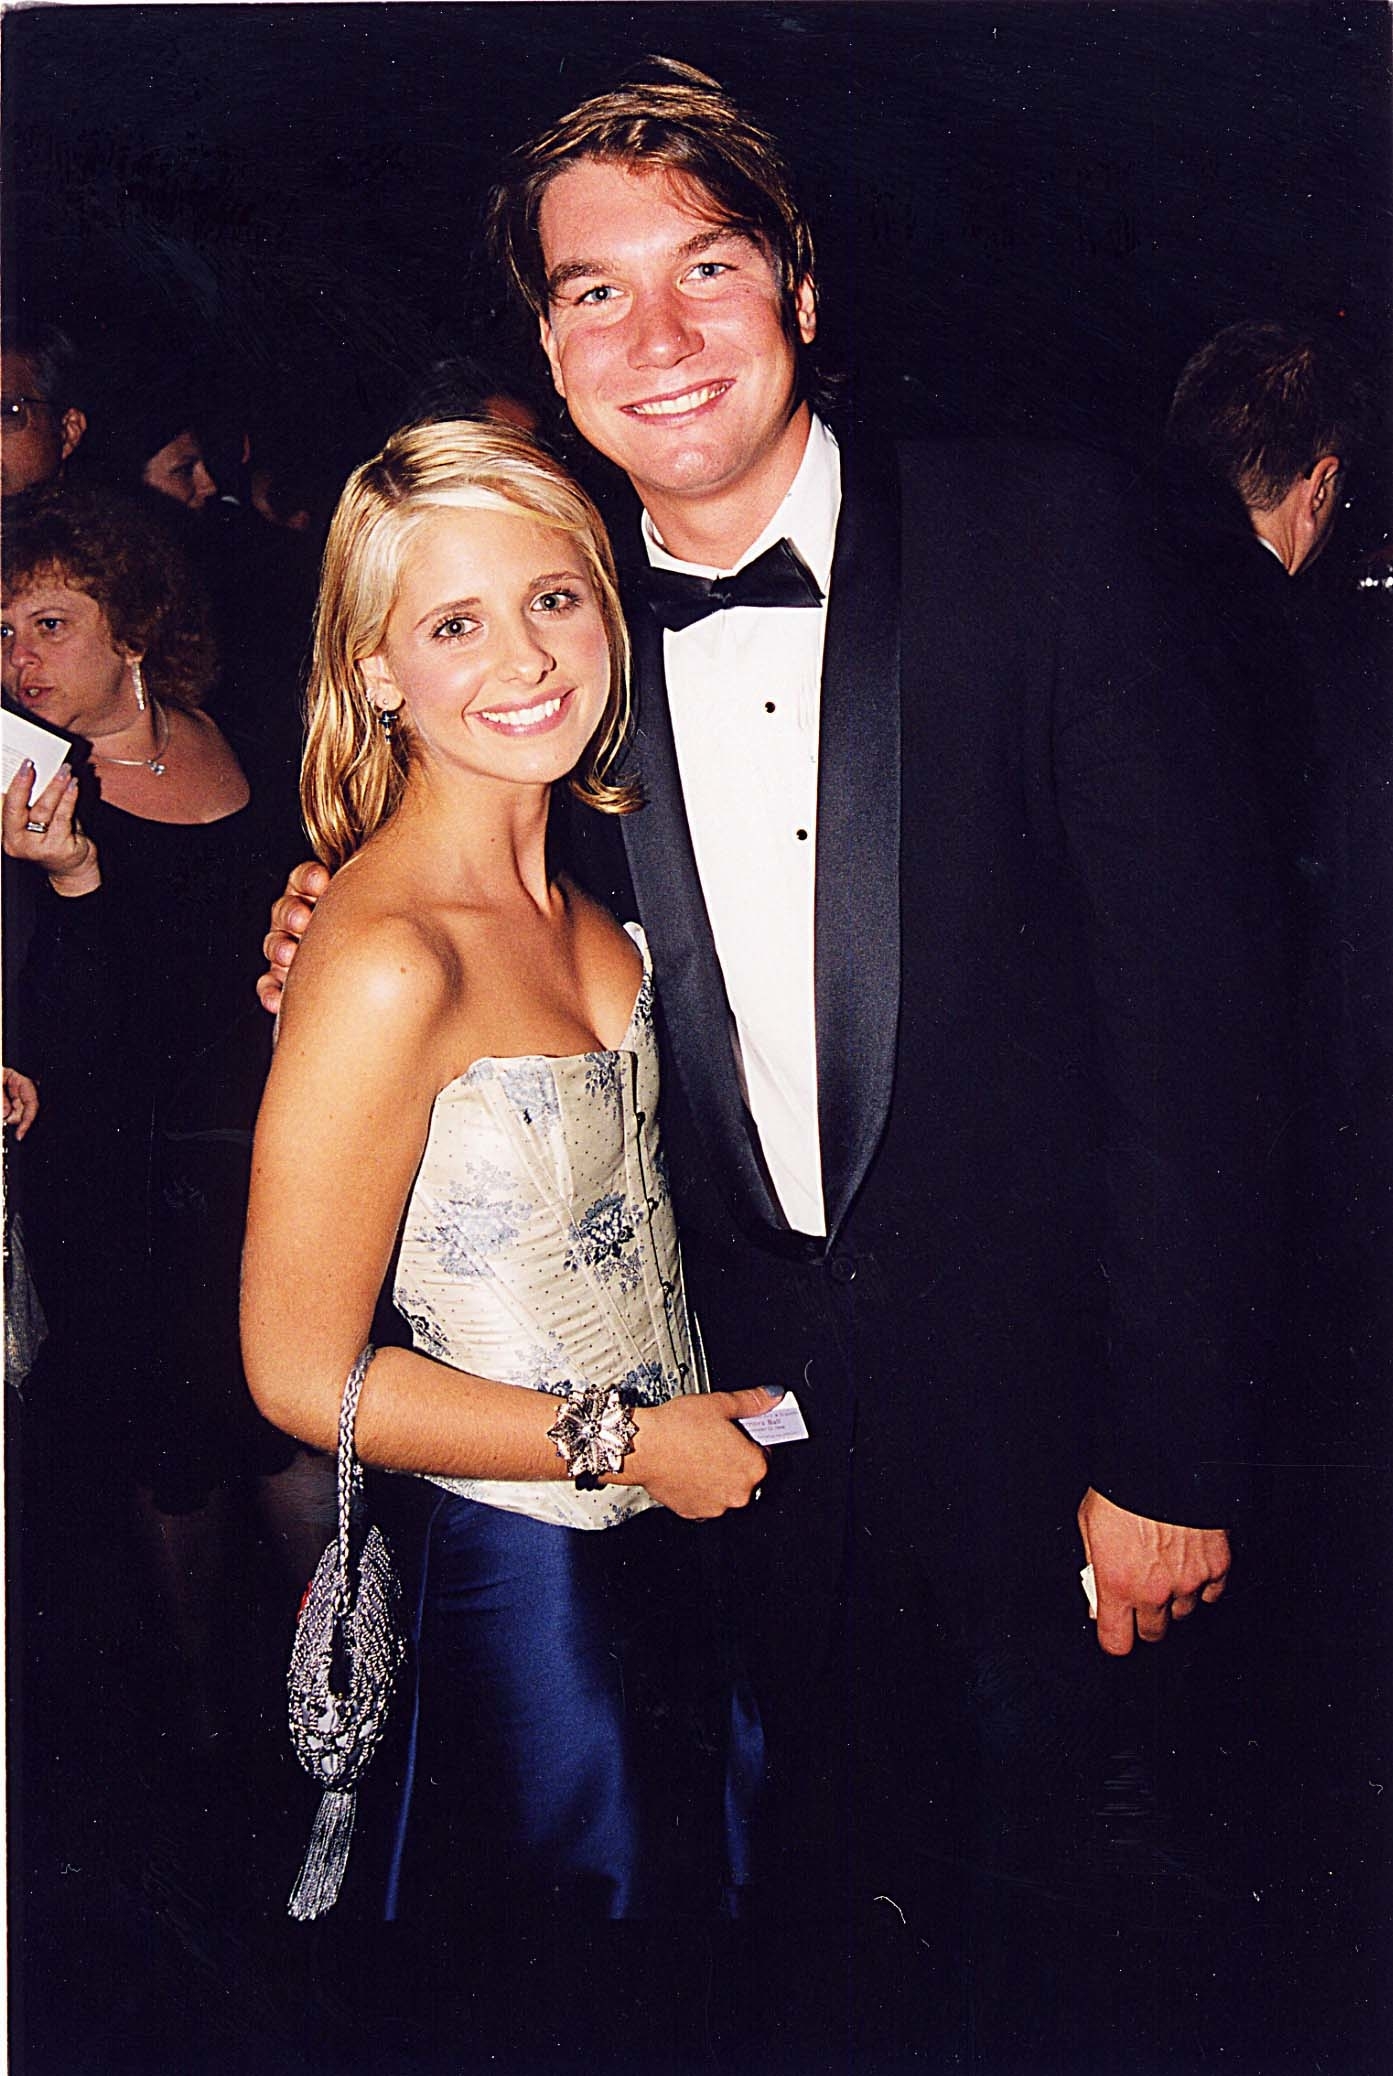 Sarah smiling in a strapless dress with embellishments, Jerry smiling in a classic tuxedo